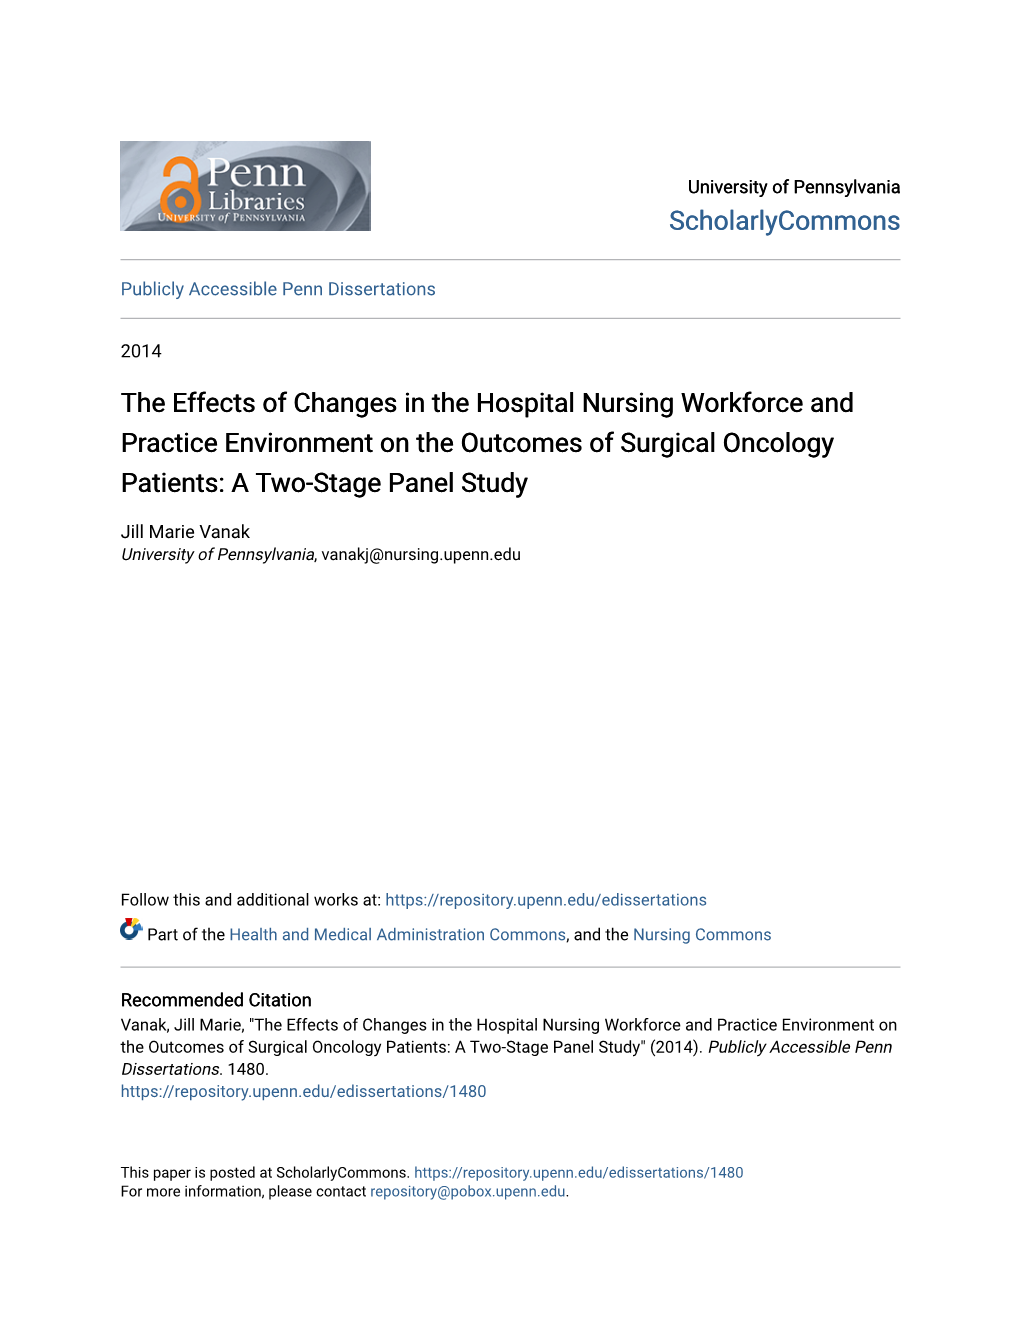 The Effects of Changes in the Hospital Nursing Workforce and Practice Environment on the Outcomes of Surgical Oncology Patients: a Two-Stage Panel Study